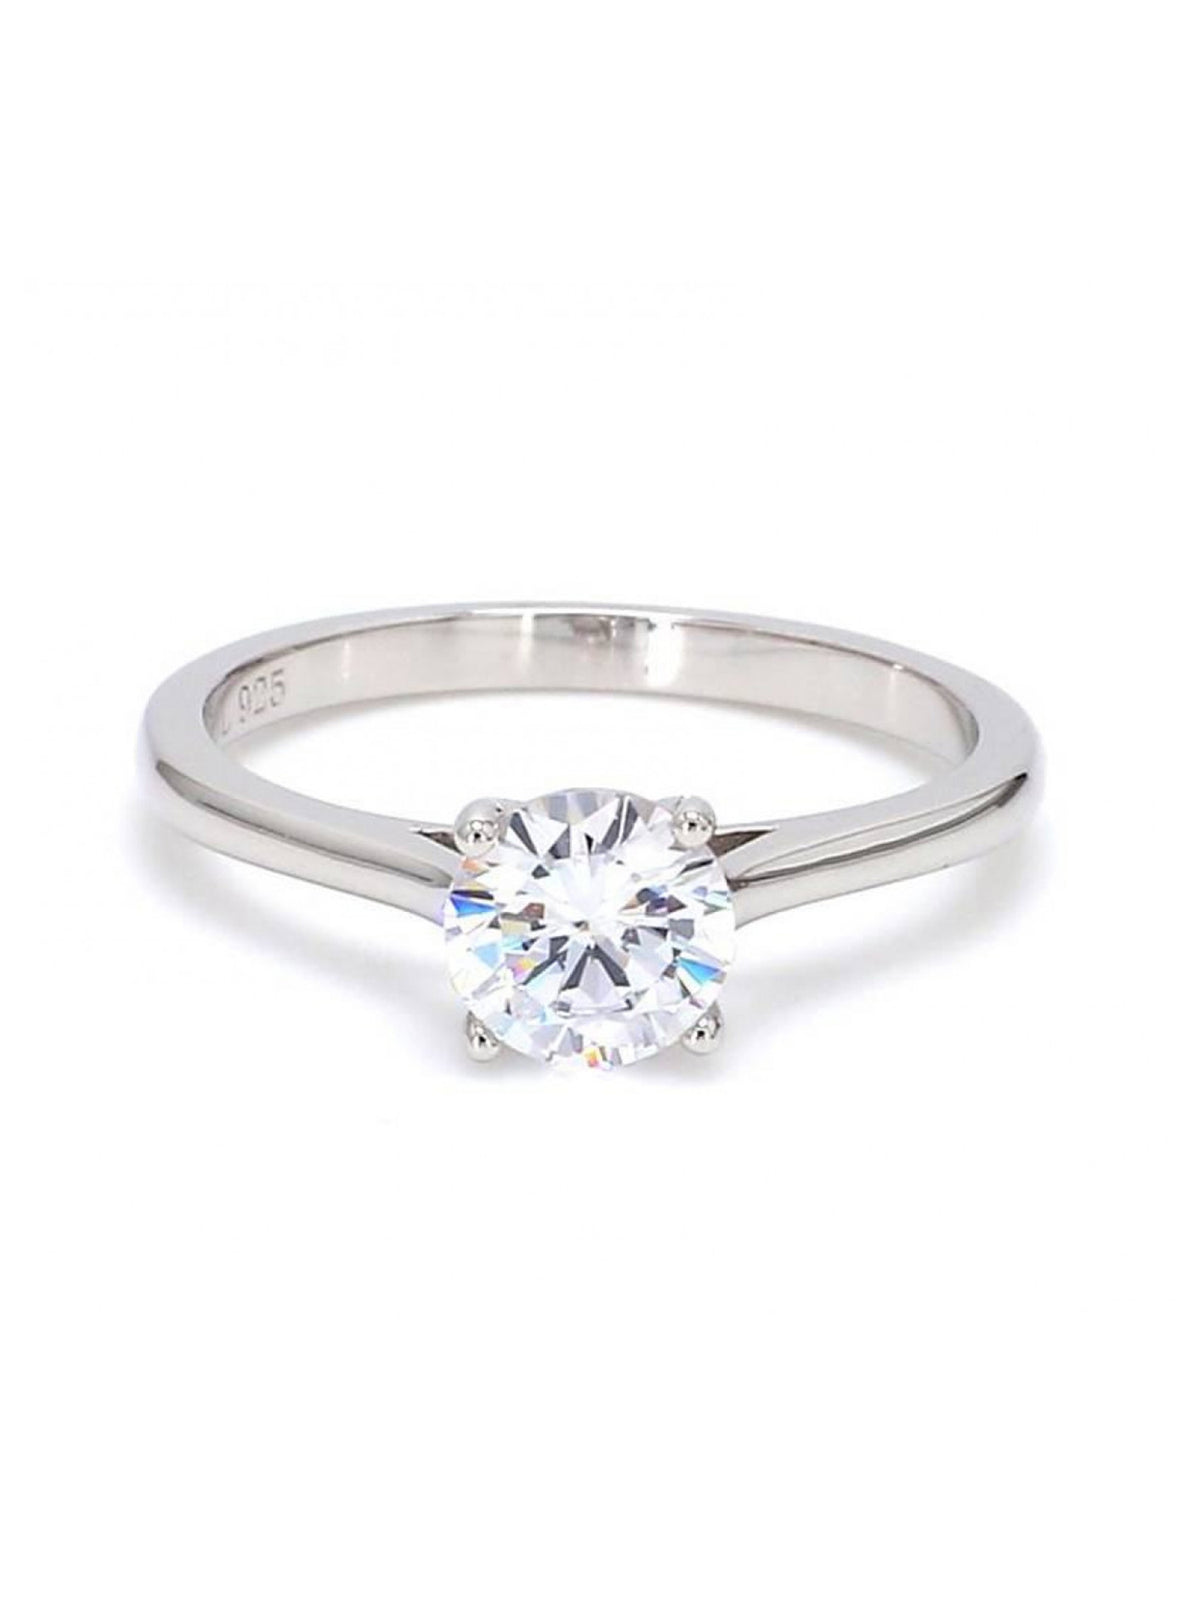 0.75 CARAT LOVE THY WOMAN SOLITAIRE RING IN SILVER 925